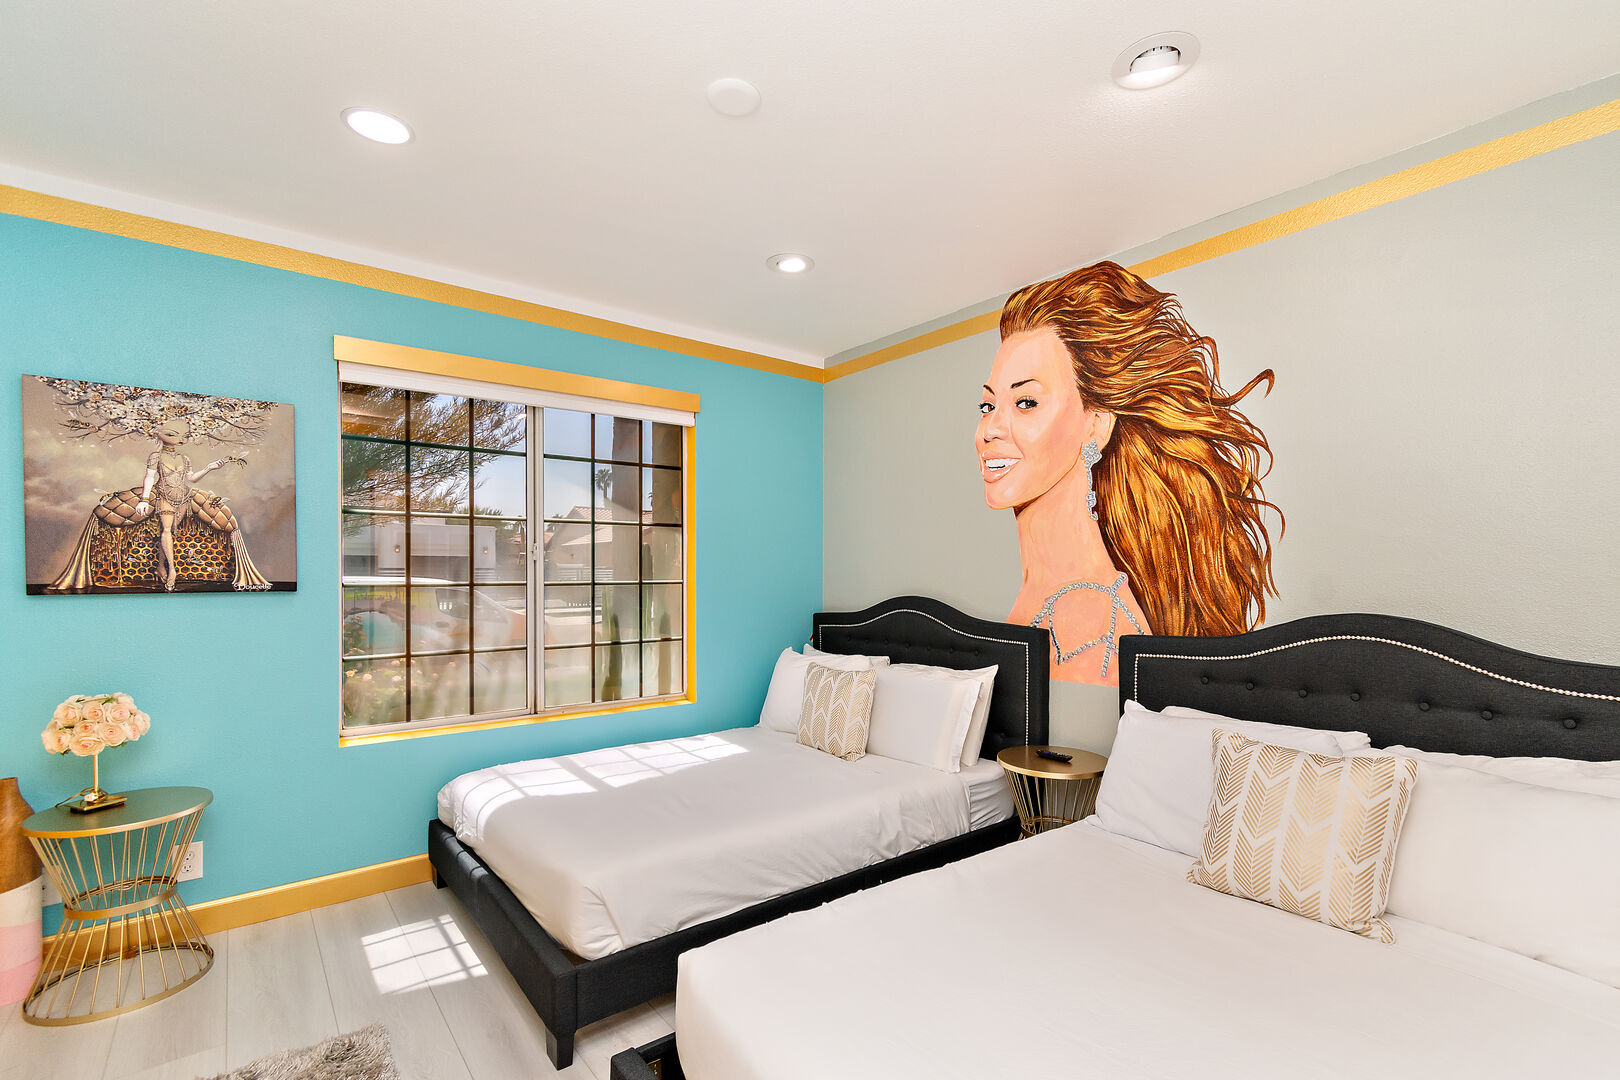 Bedroom 4 is located next to bedroom 3 and features two Full-sized Beds, a 40-inch TCL with Roku Smart television, and a Beyoncé mural.